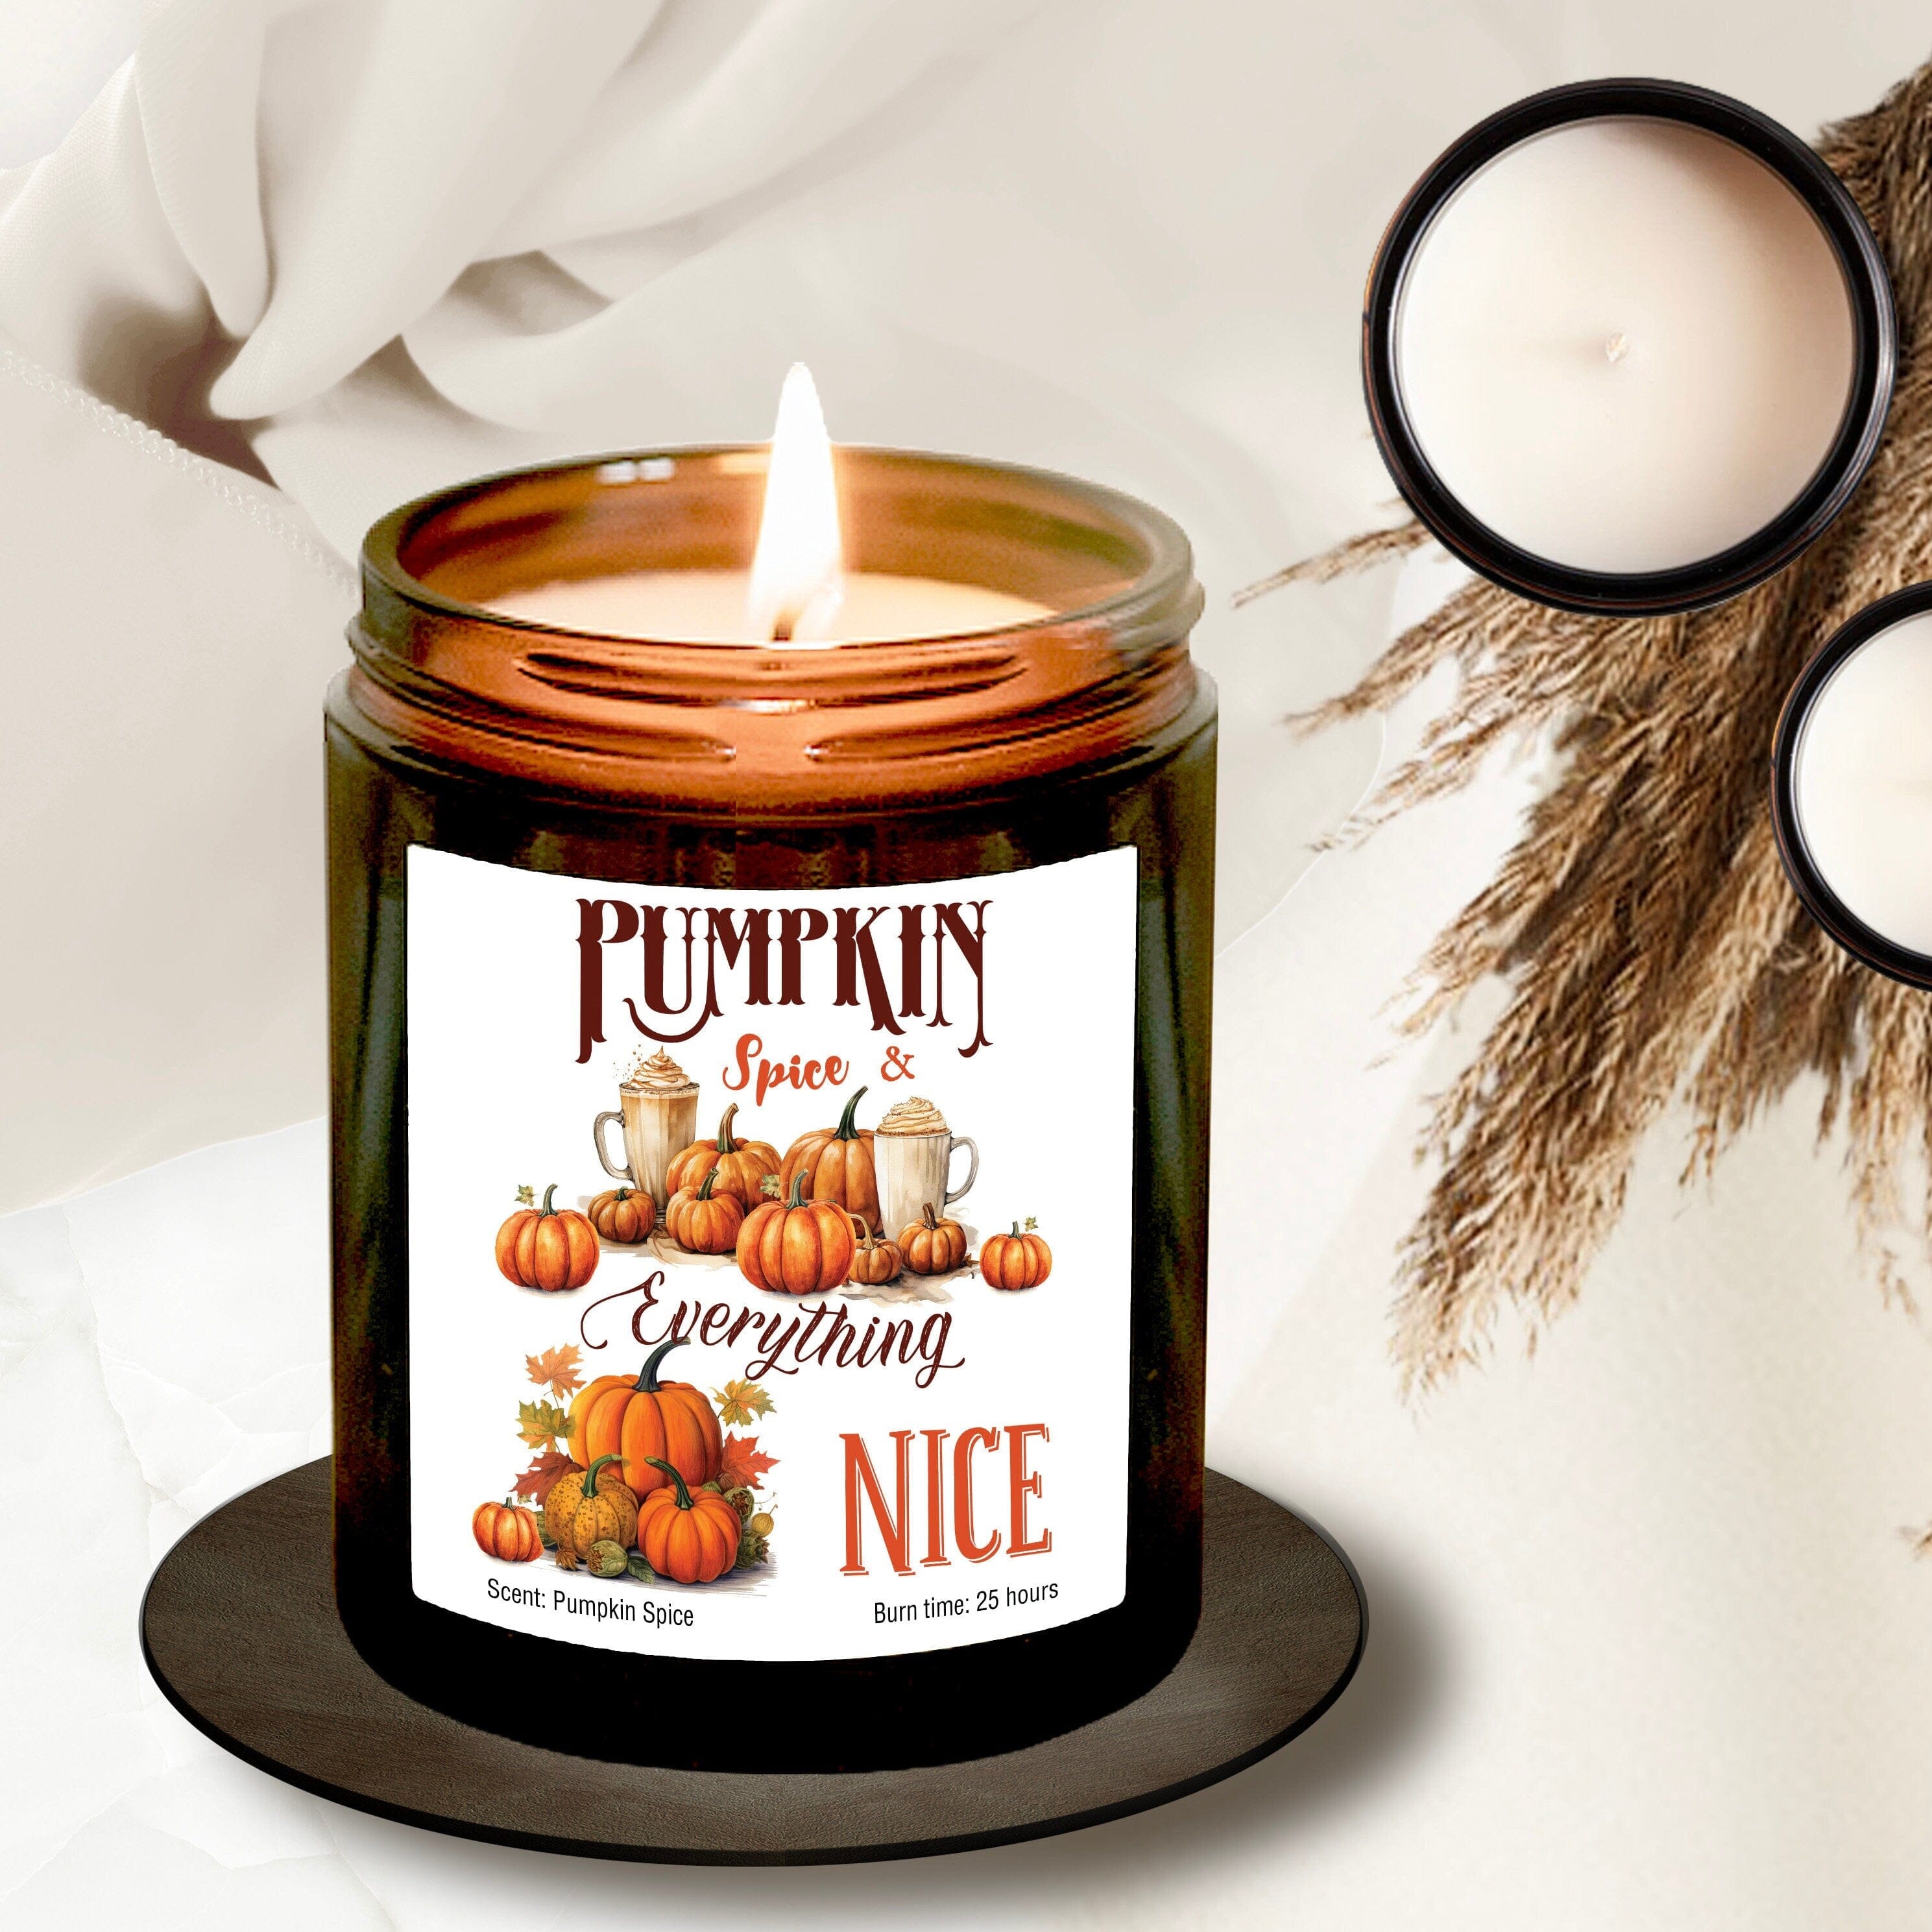 Pumpkin Spice Everything Nice Candle, Pumpkin Spice Scent, Cosy Autumn Gift for Friends Mum Dad Grandma Home Décor